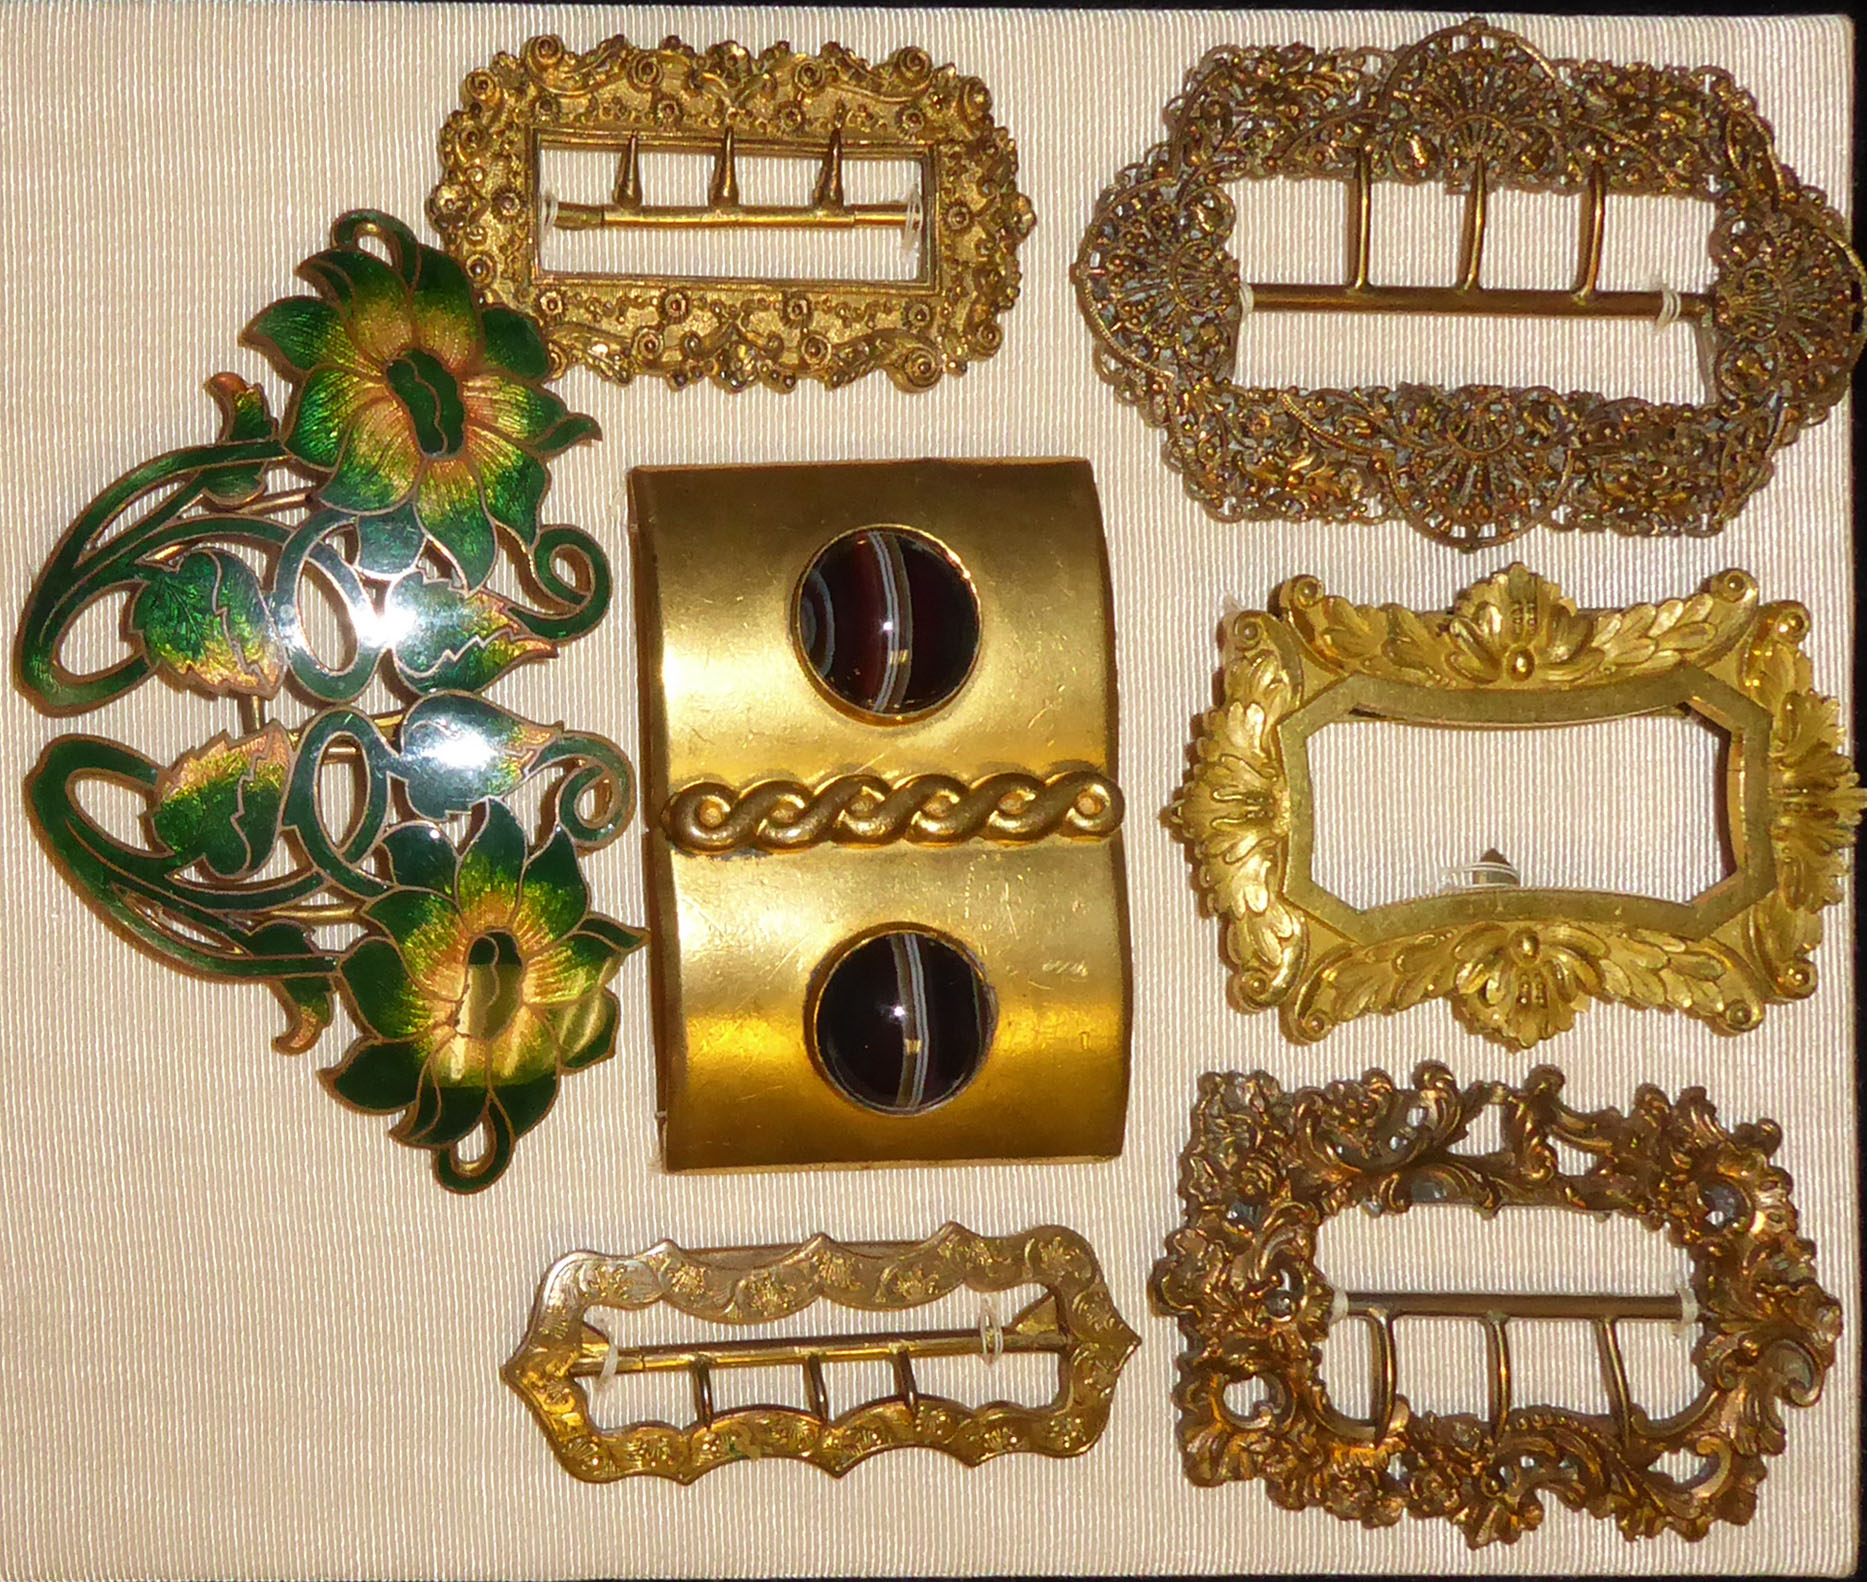 A COLLECTION OF 19TH CENTURY GILT BRASS RECTANGULAR BUCKLES With engraved decoration, a pair set